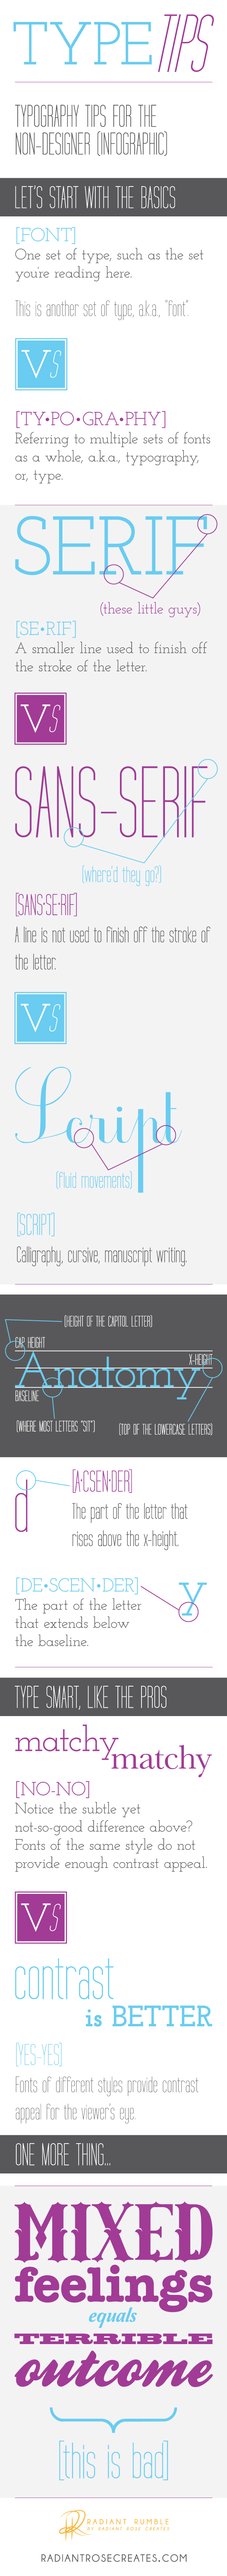 Type Tips (Typography Tips for the Non-Designer) Infographic + Radiant Rumble Blog